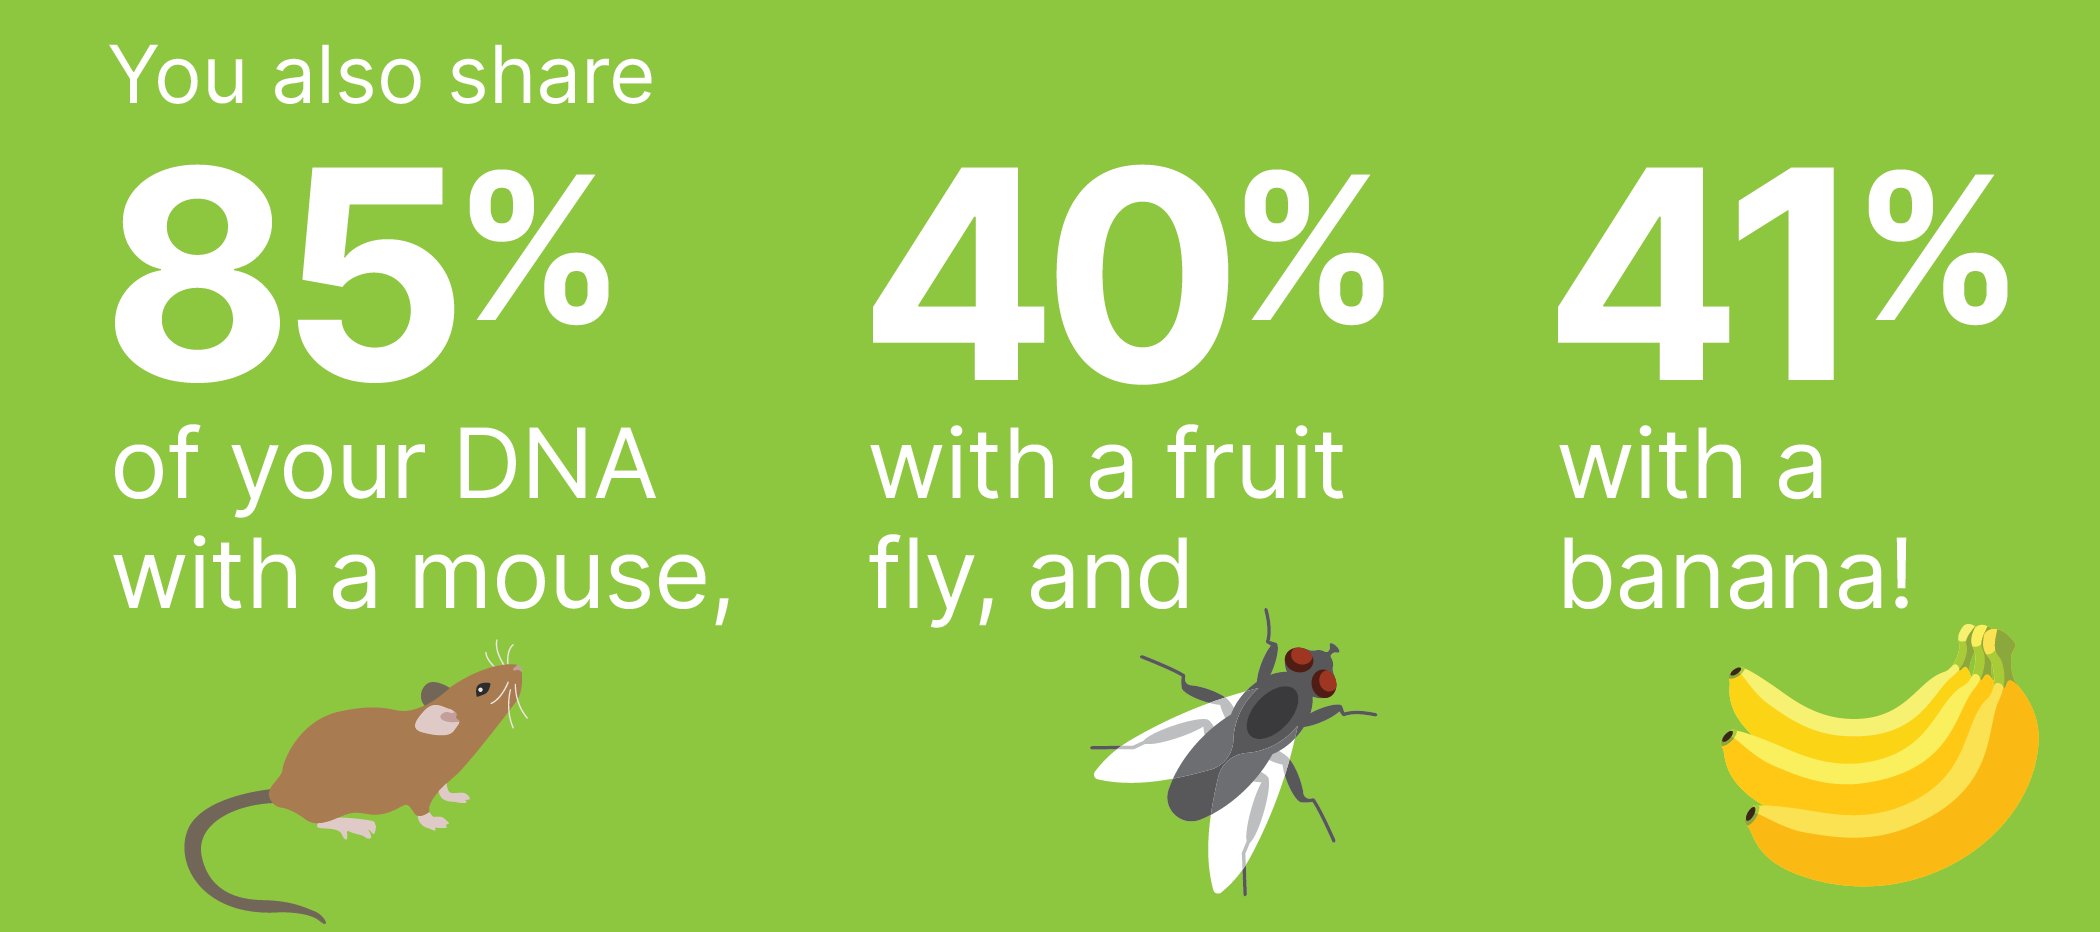 You also share 85% of your DNA with a mouse, 40% with a fruit fly, and 41% with a banana!